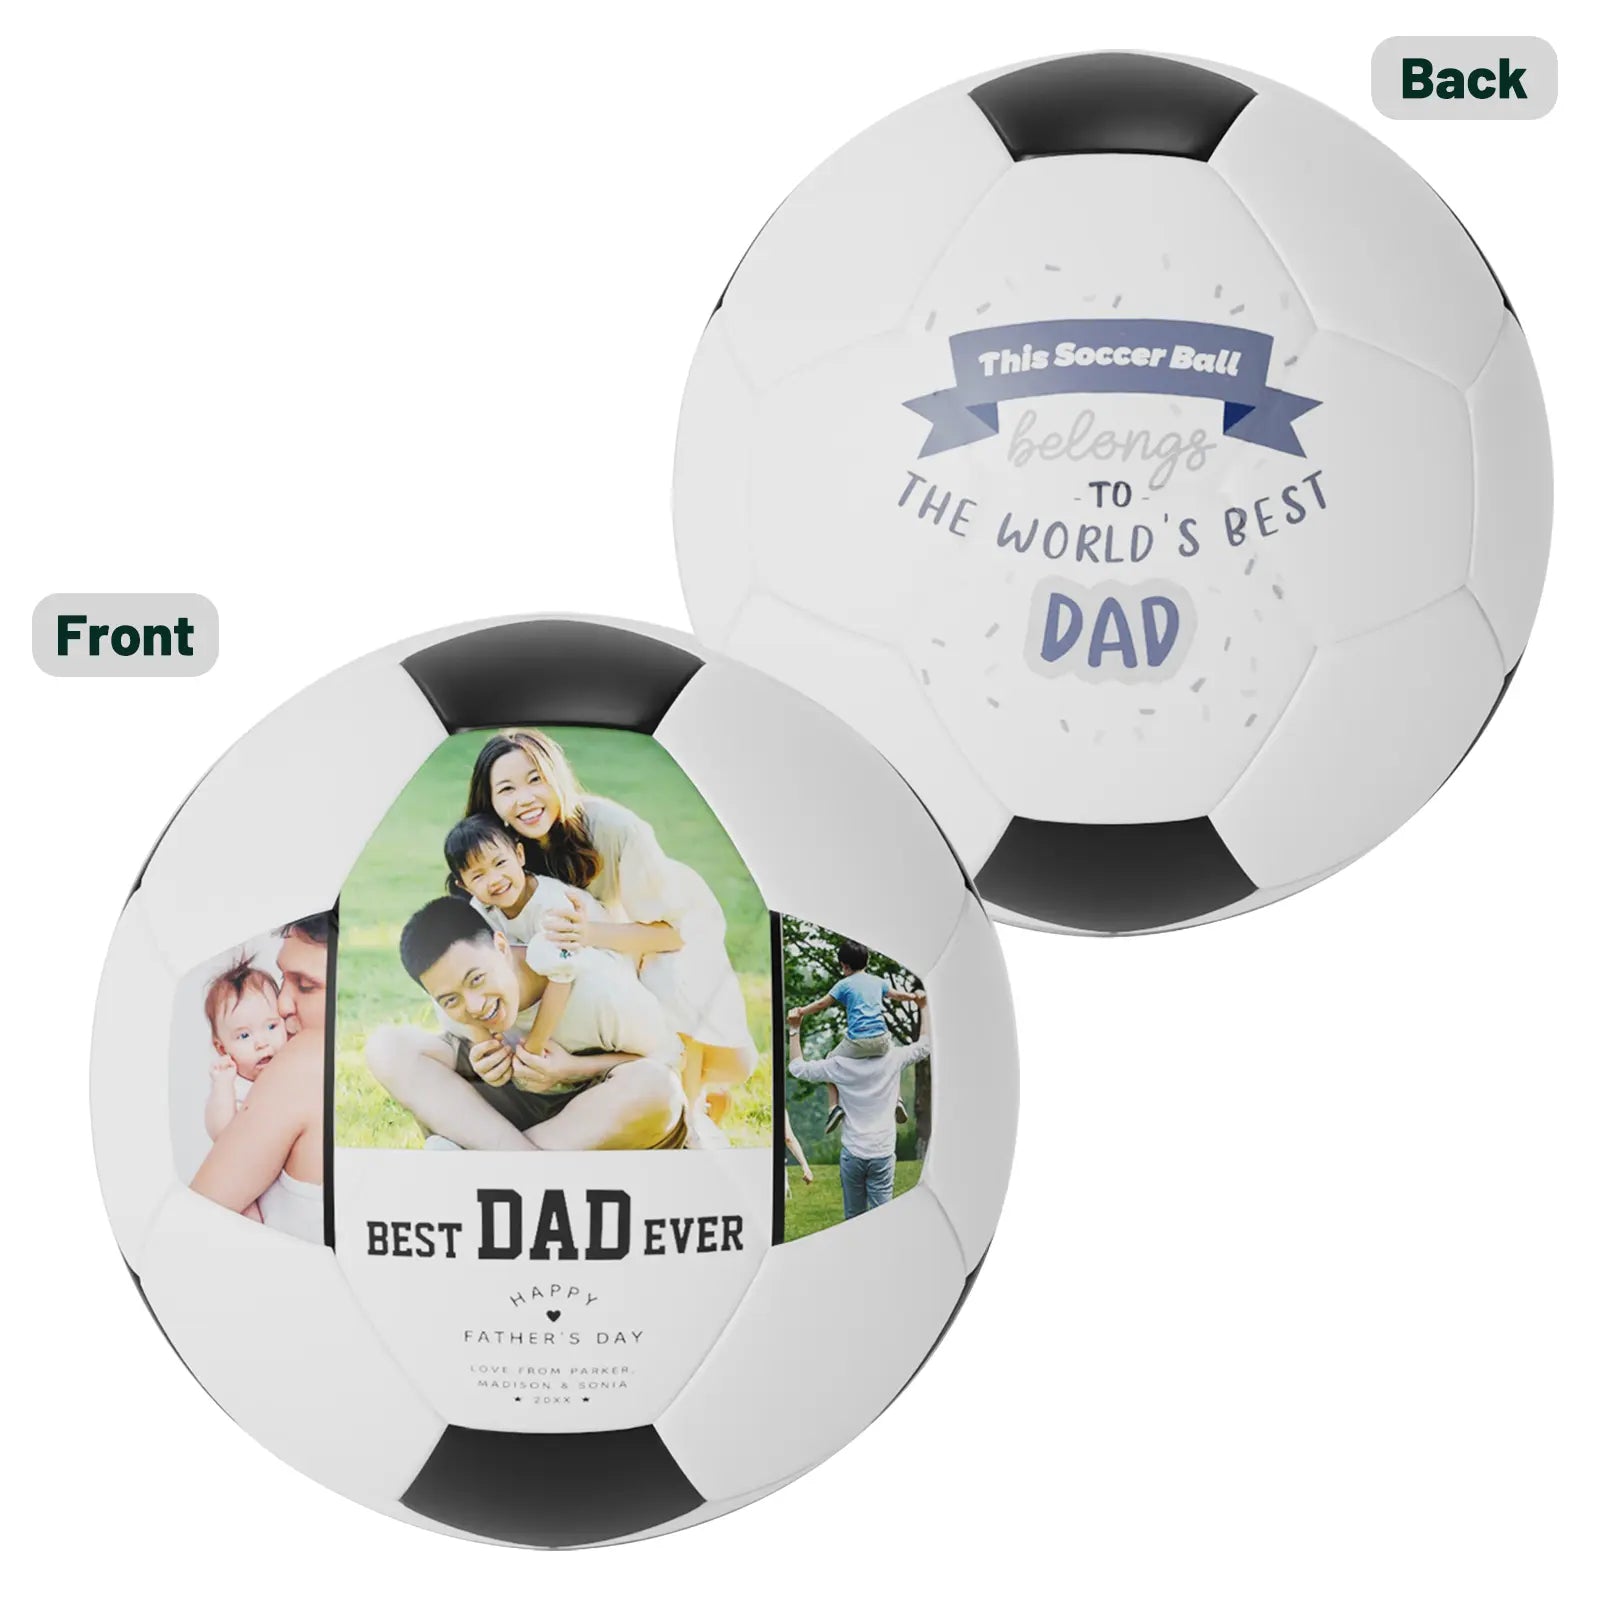 Personalized Custom 3 Photos Gifts Soccer Ball For Father's Day - Family Watchs